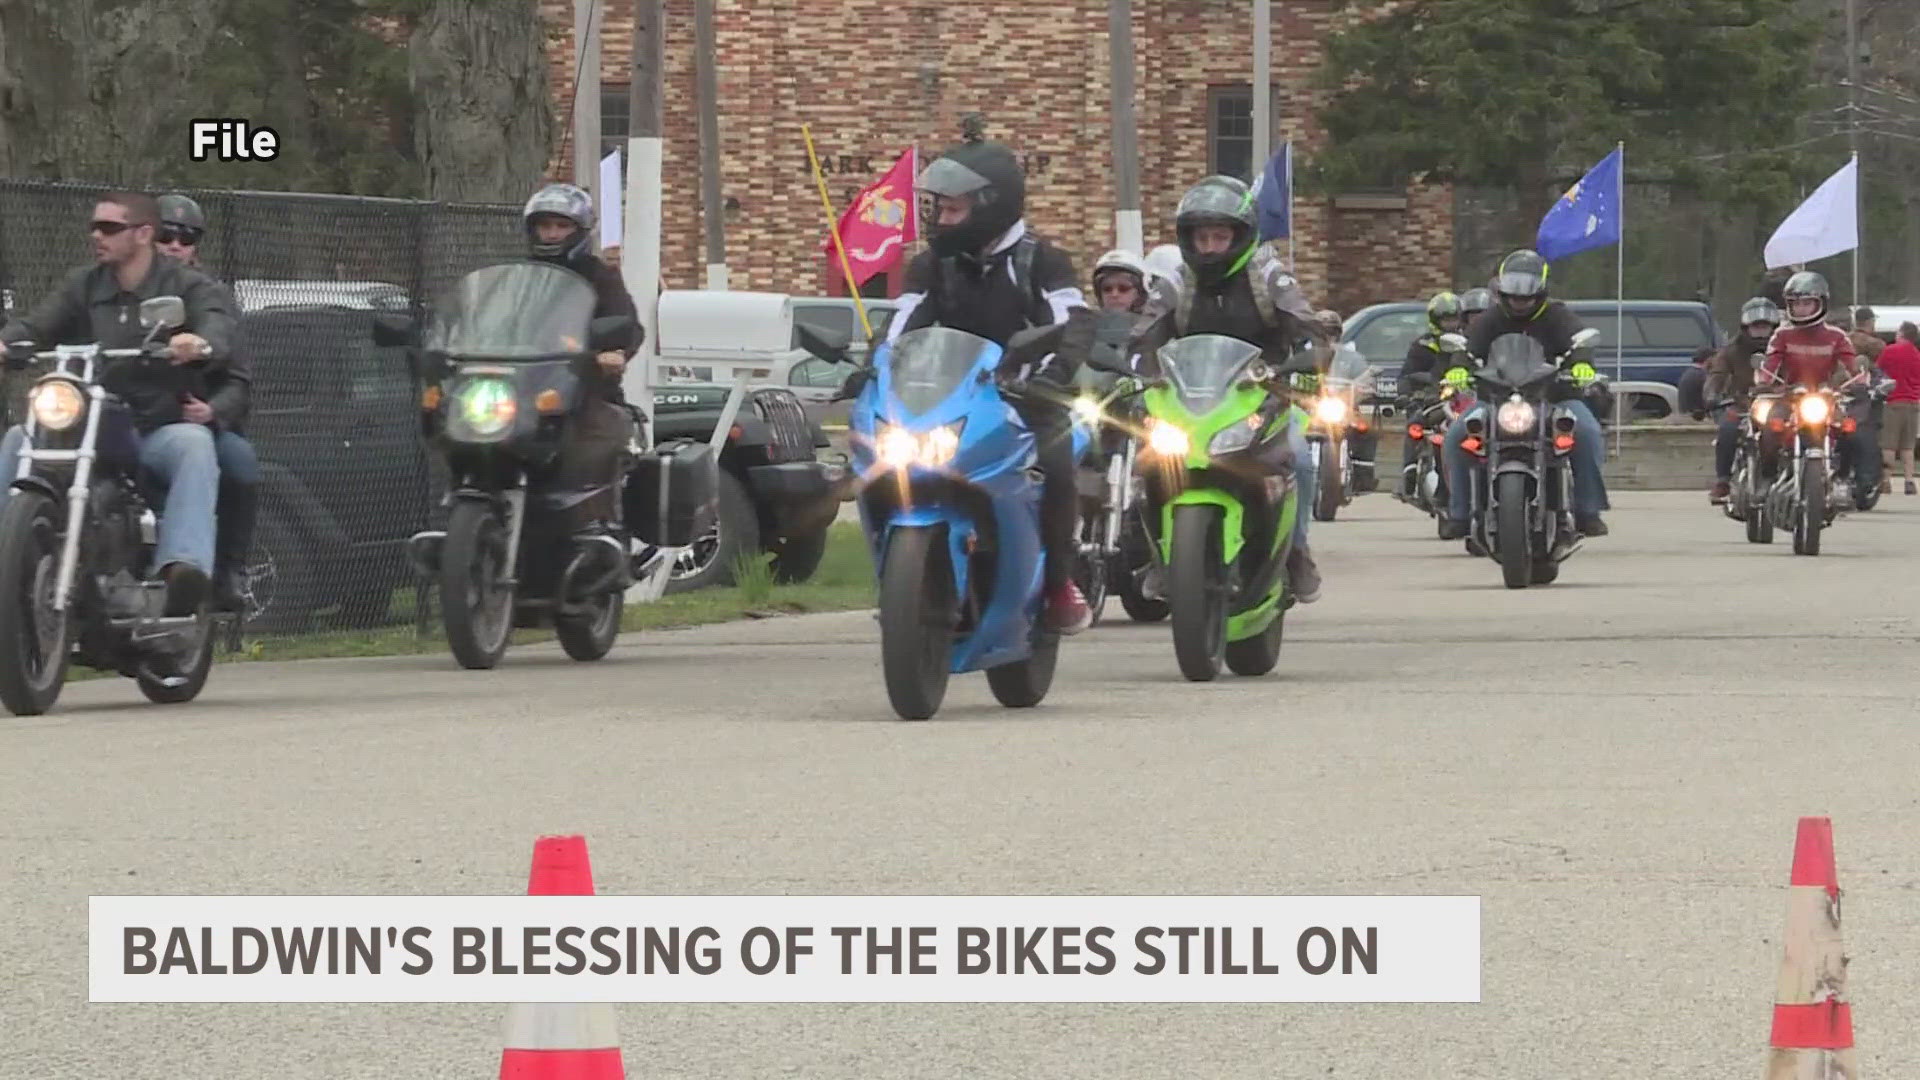 Holland had to cancel its Blessing of the Bikes after a threat was made.